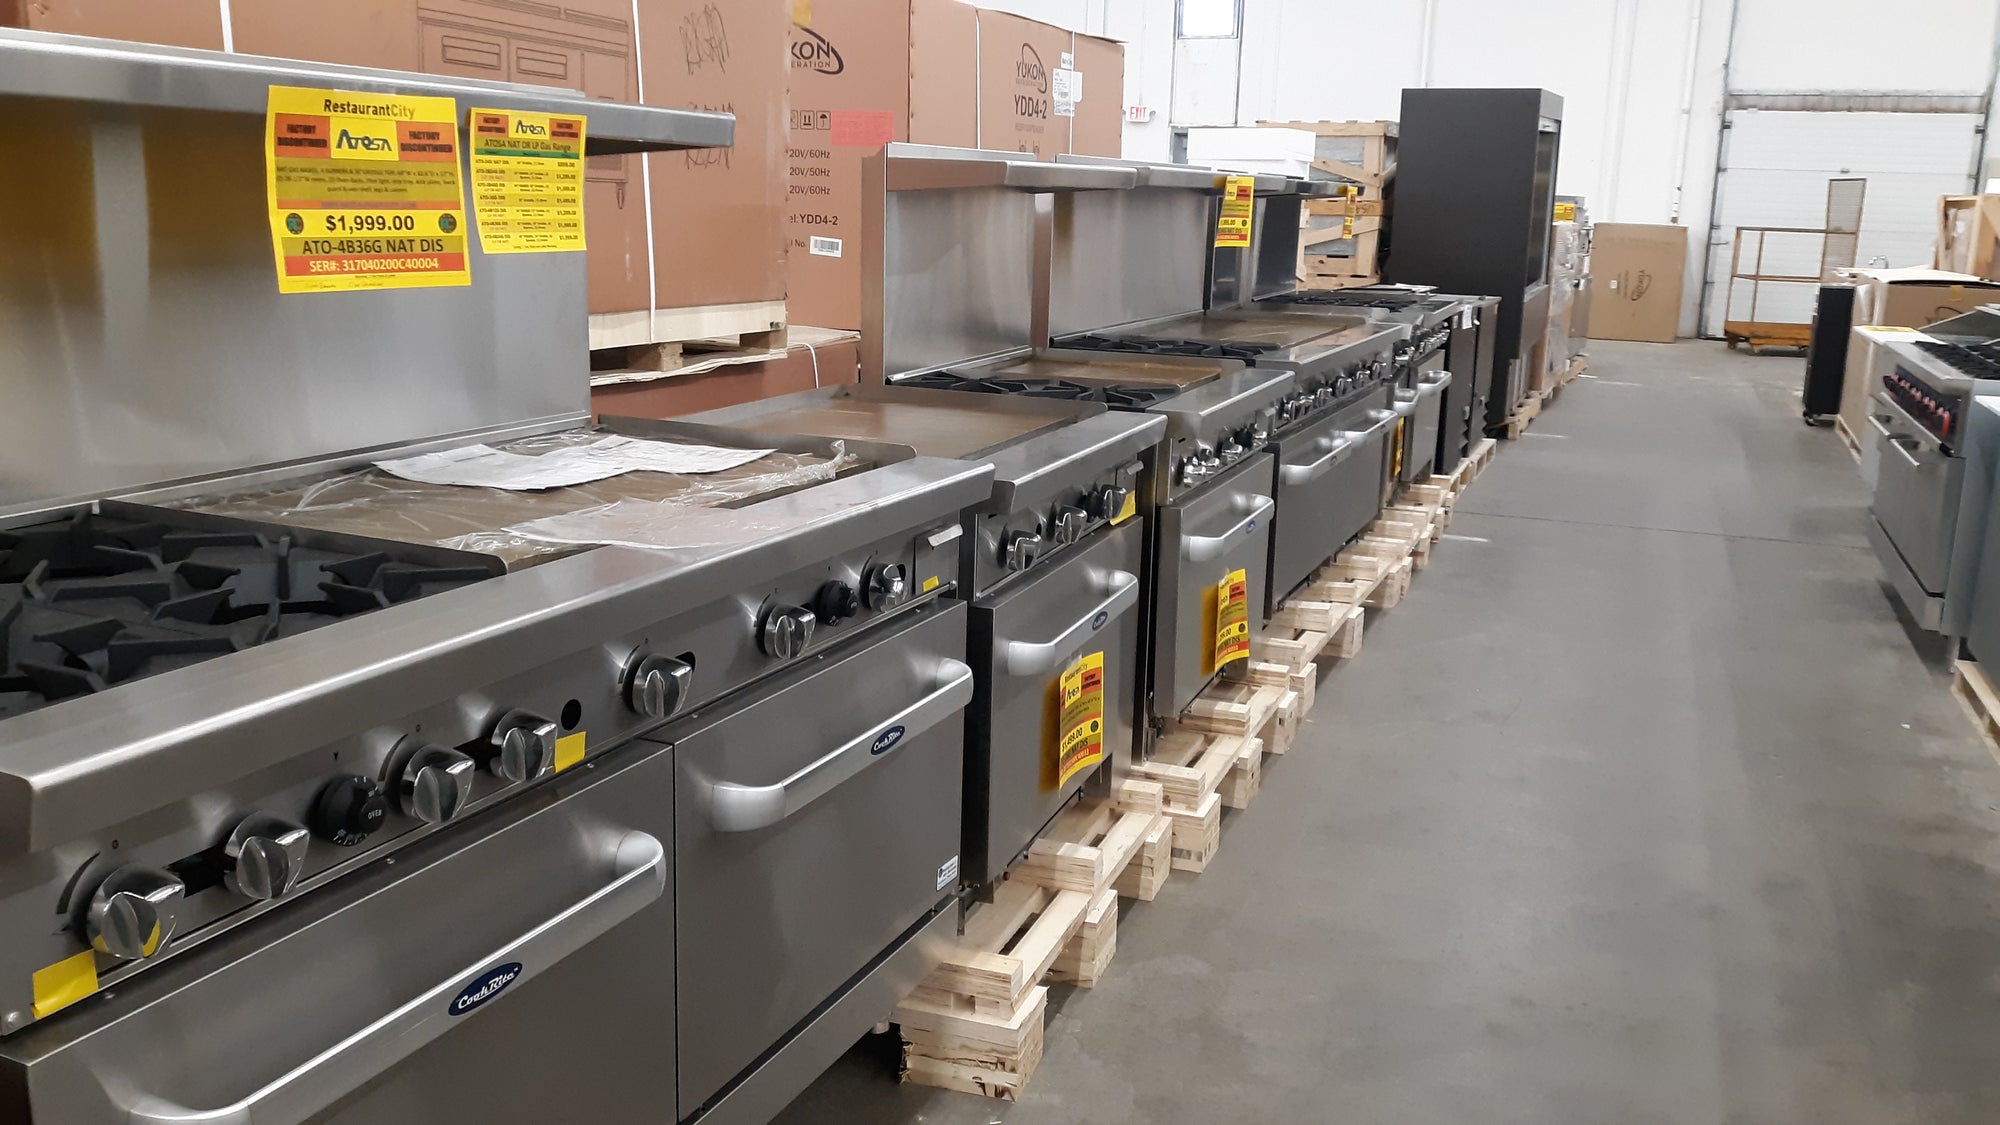 Commercial Ranges and Cooking Equipment from Garland/US Range, Vulcan, Star, Southbend, Bakers Pride, Atosa, Padela, and more!  All configurations and sizes available!